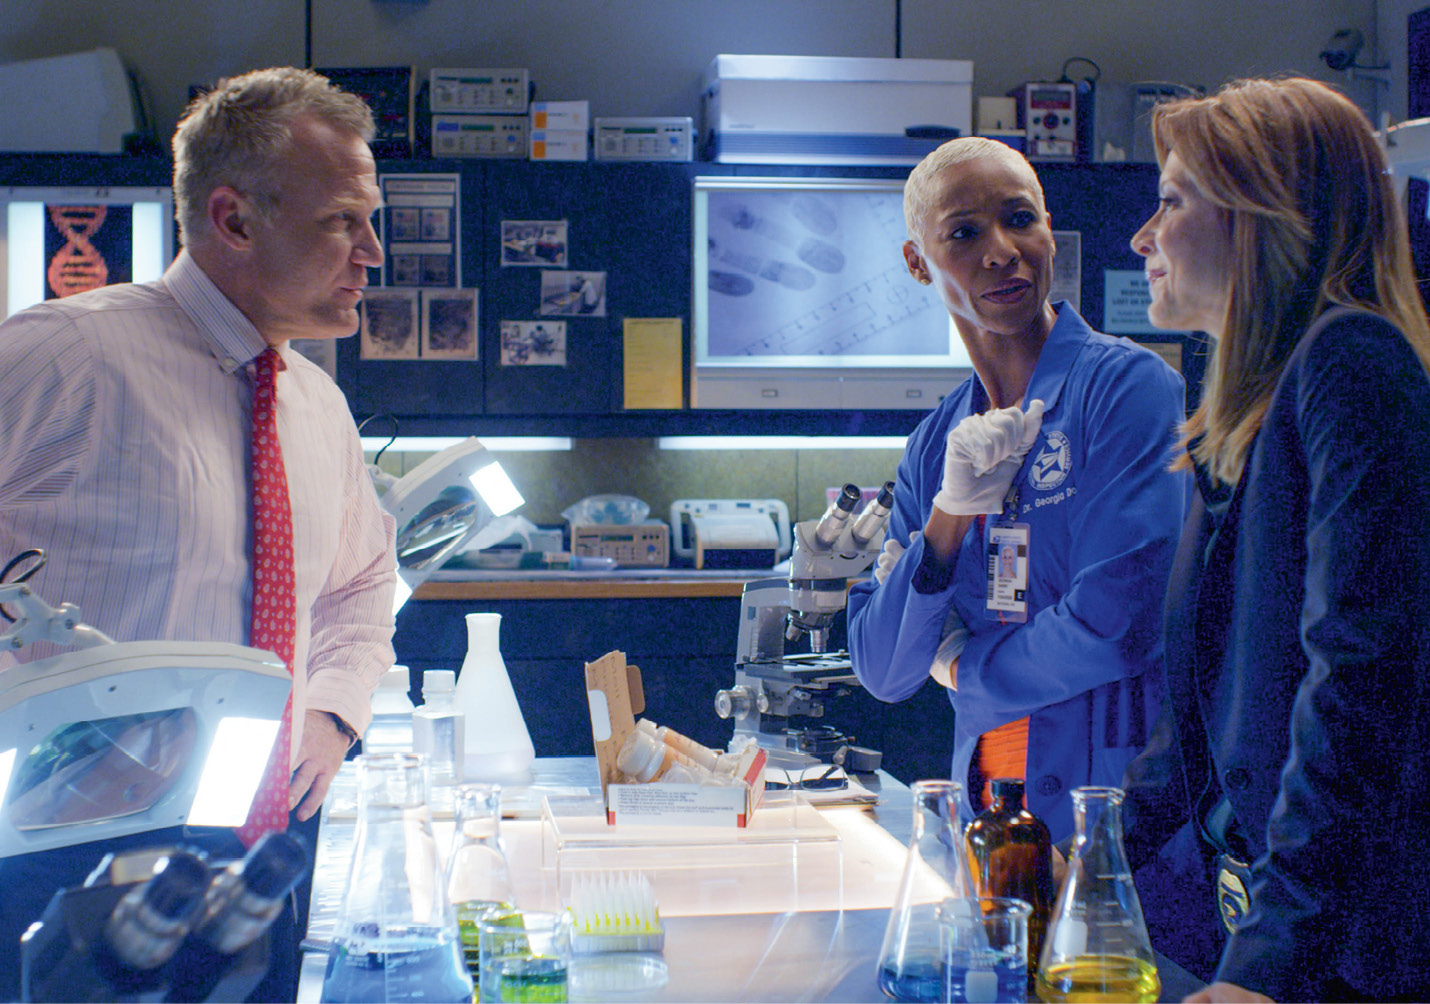 The Inspectors’ cast includes (above, left to right) Terry Serpico, Charmin Lee, and Jessica Lundy, shown in the “crime lab.”